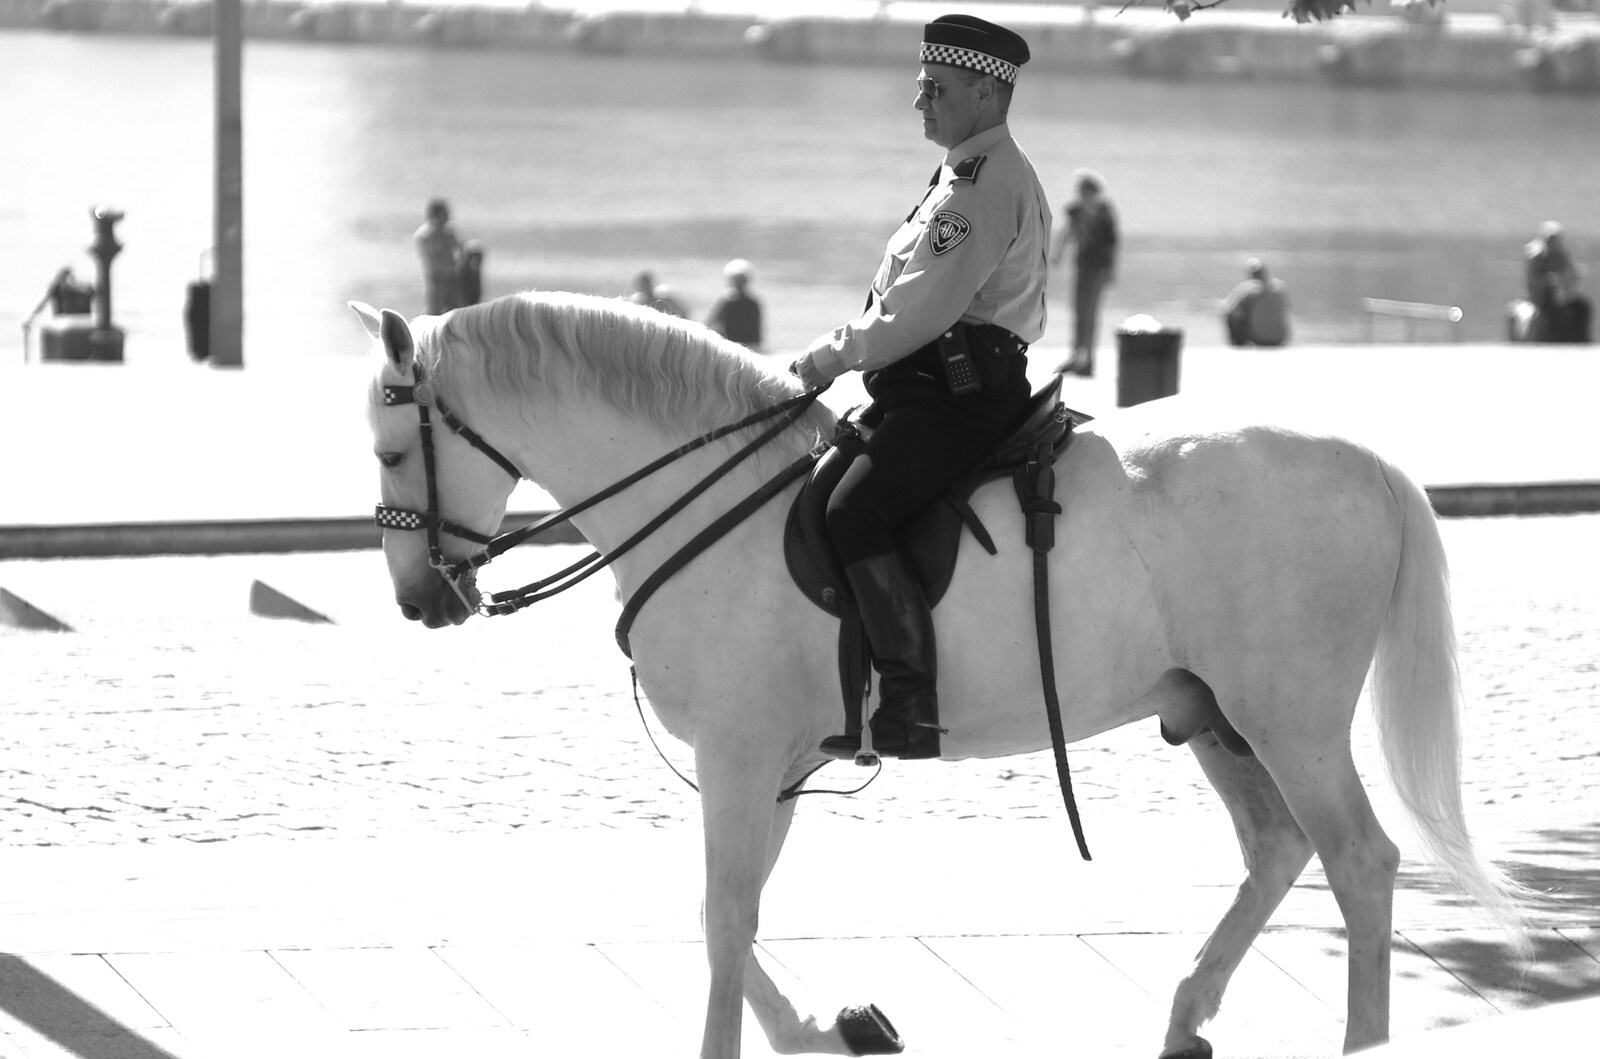 A policeman on horseback from A Trip to Barcelona, Catalunya, Spain - 29th April 2005